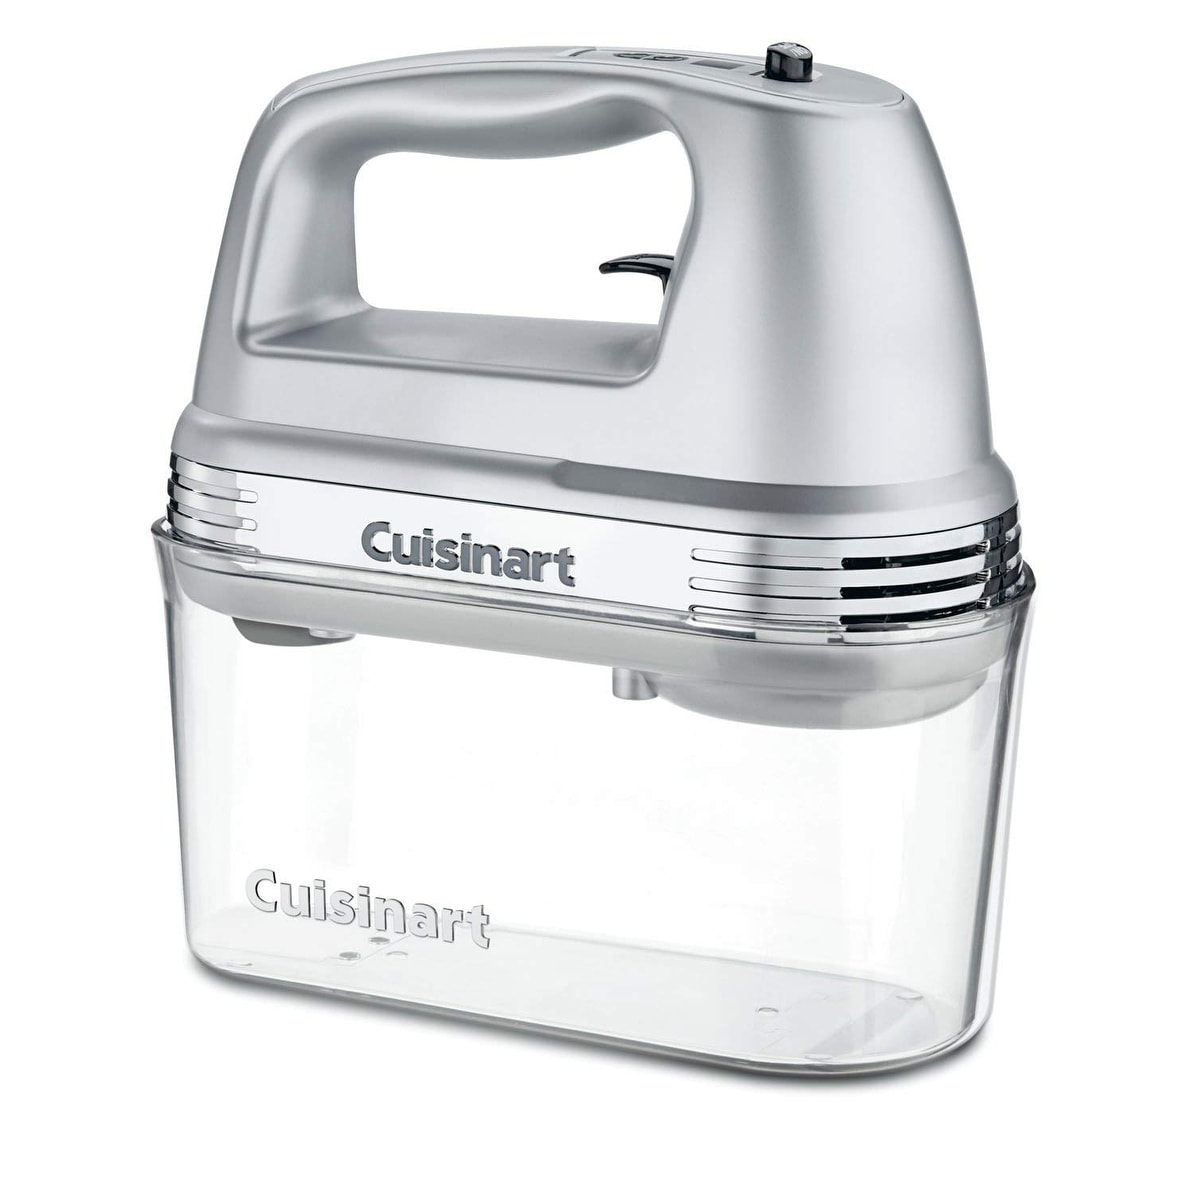 https://ak1.ostkcdn.com/images/products/is/images/direct/879c98b4919a37fed5e1eb165ab6e7b6cee7e870/Cuisinart-HM-90BCS-Power-Advantage-Plus-9-Speed-Handheld-Mixer-with-Storage-Case%2C-Brushed-Chrome.jpg